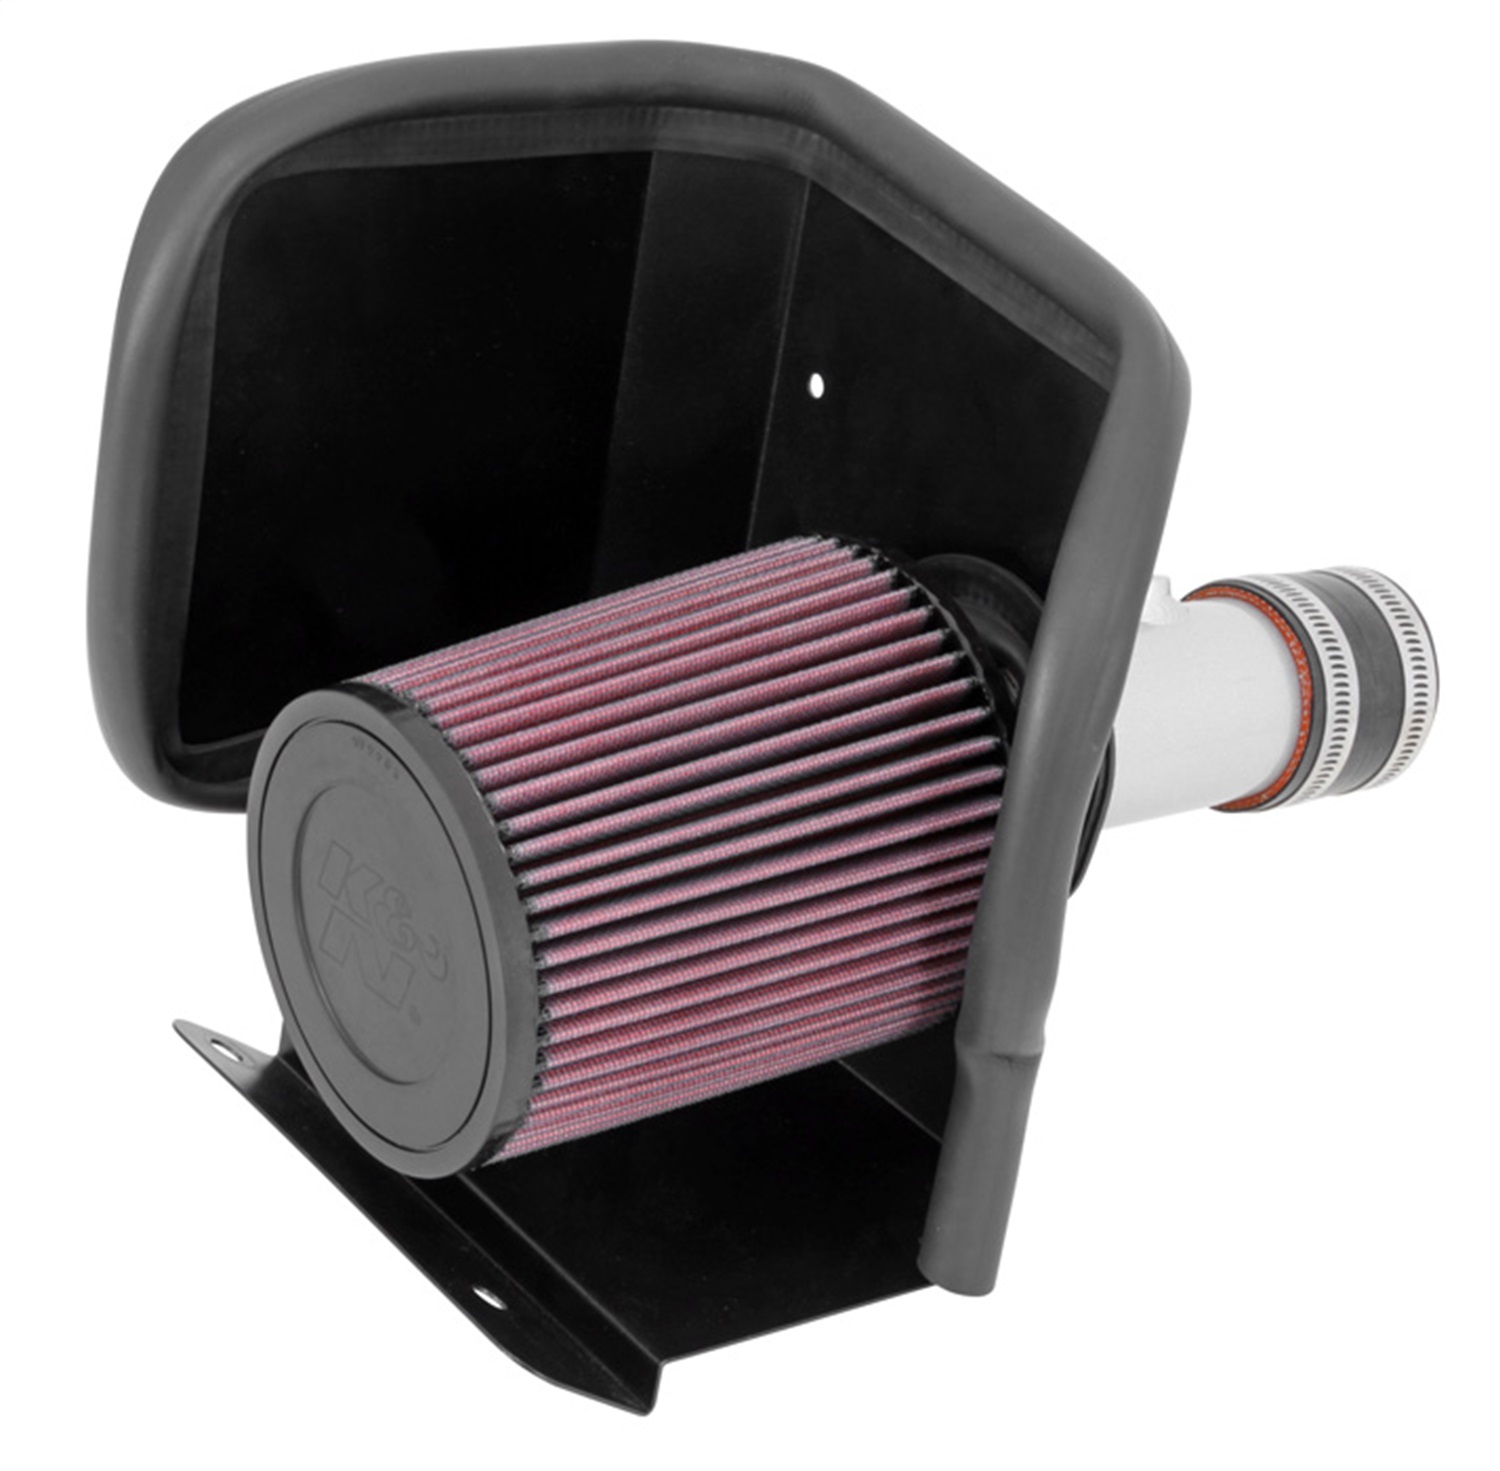 K&N Filters K&N Filters 69-2548TS Typhoon; Cold Air Intake Filter Assembly Fits 13 Dart